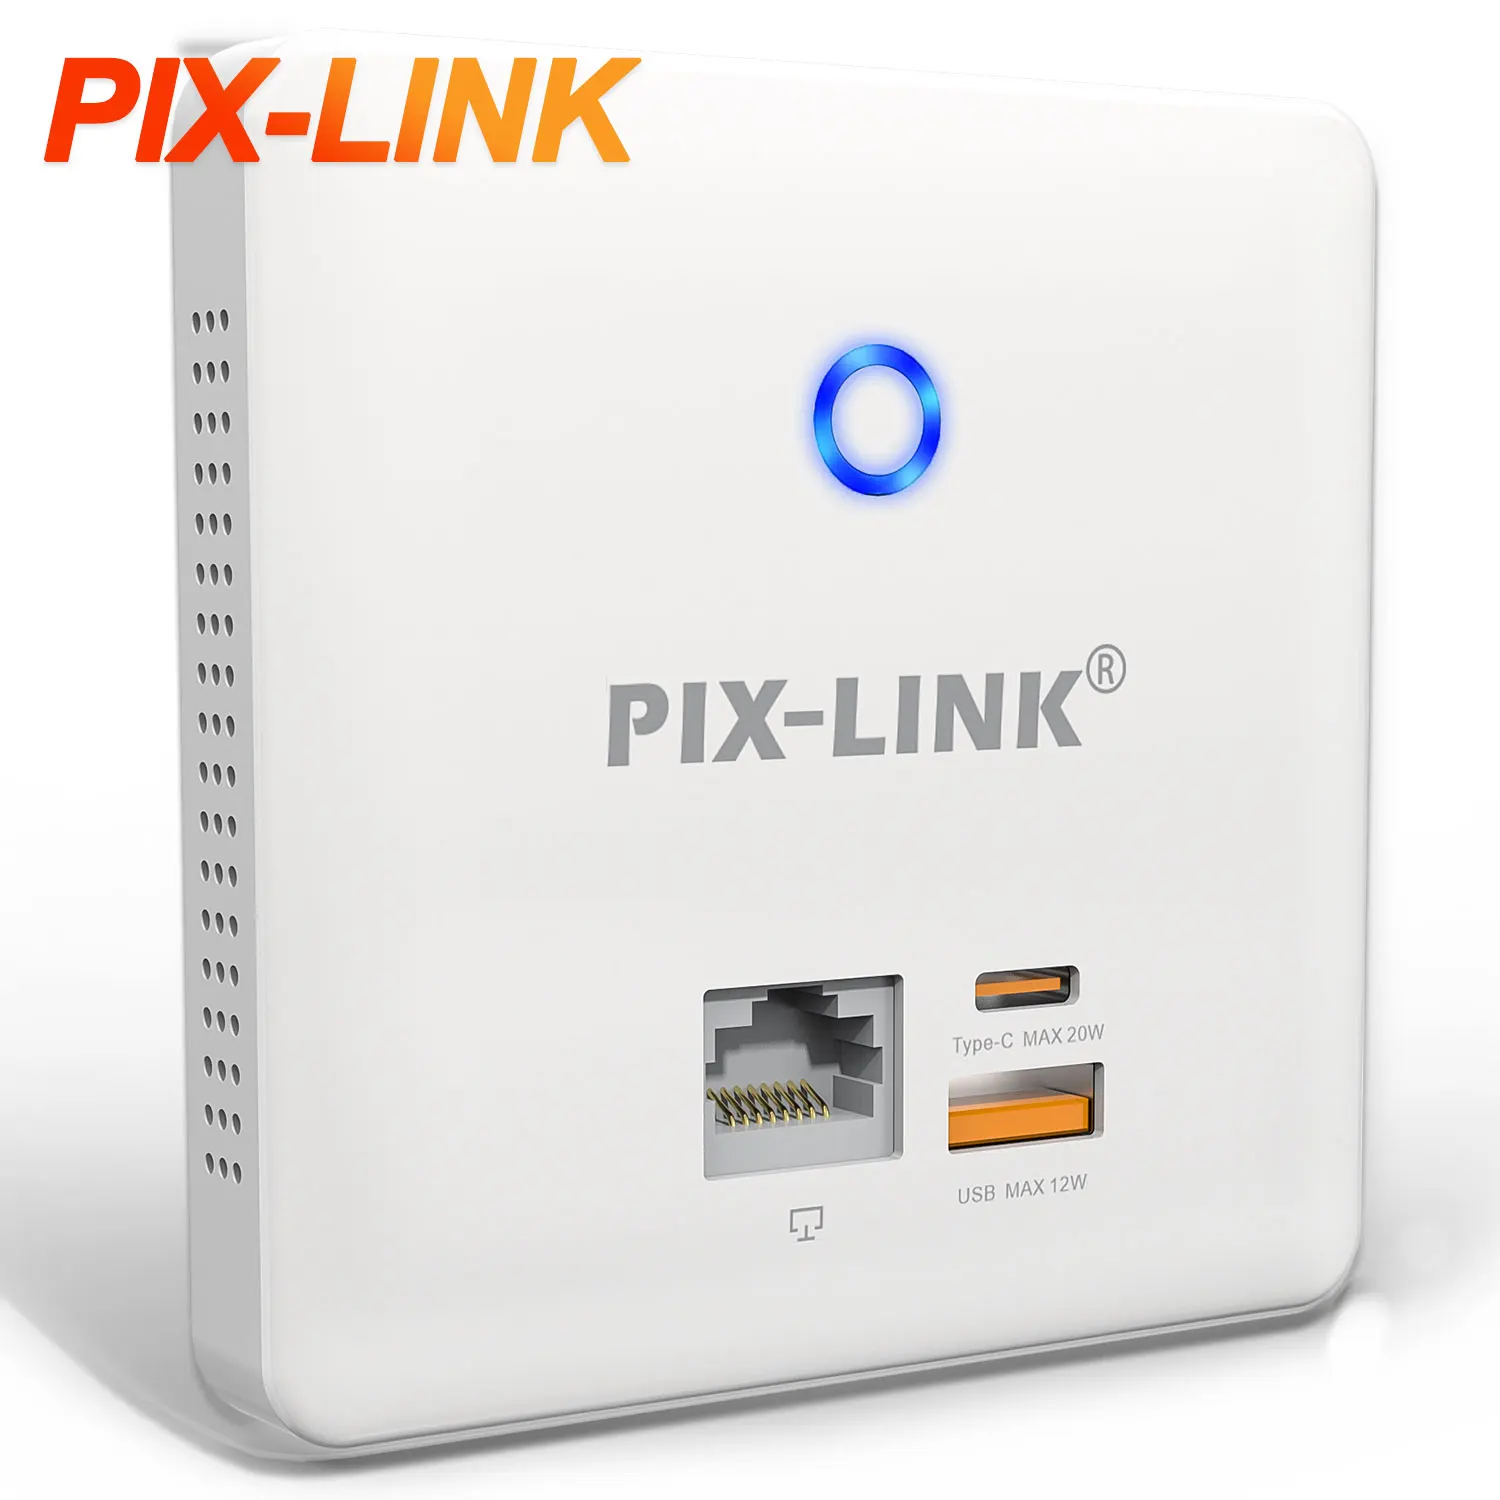 

PIX LINK 300M 1200Mbps 2.4G/5GHz High Power Outdoor Router Omnidirectional Coverage Wifi Base Station Antenna AP Access Point